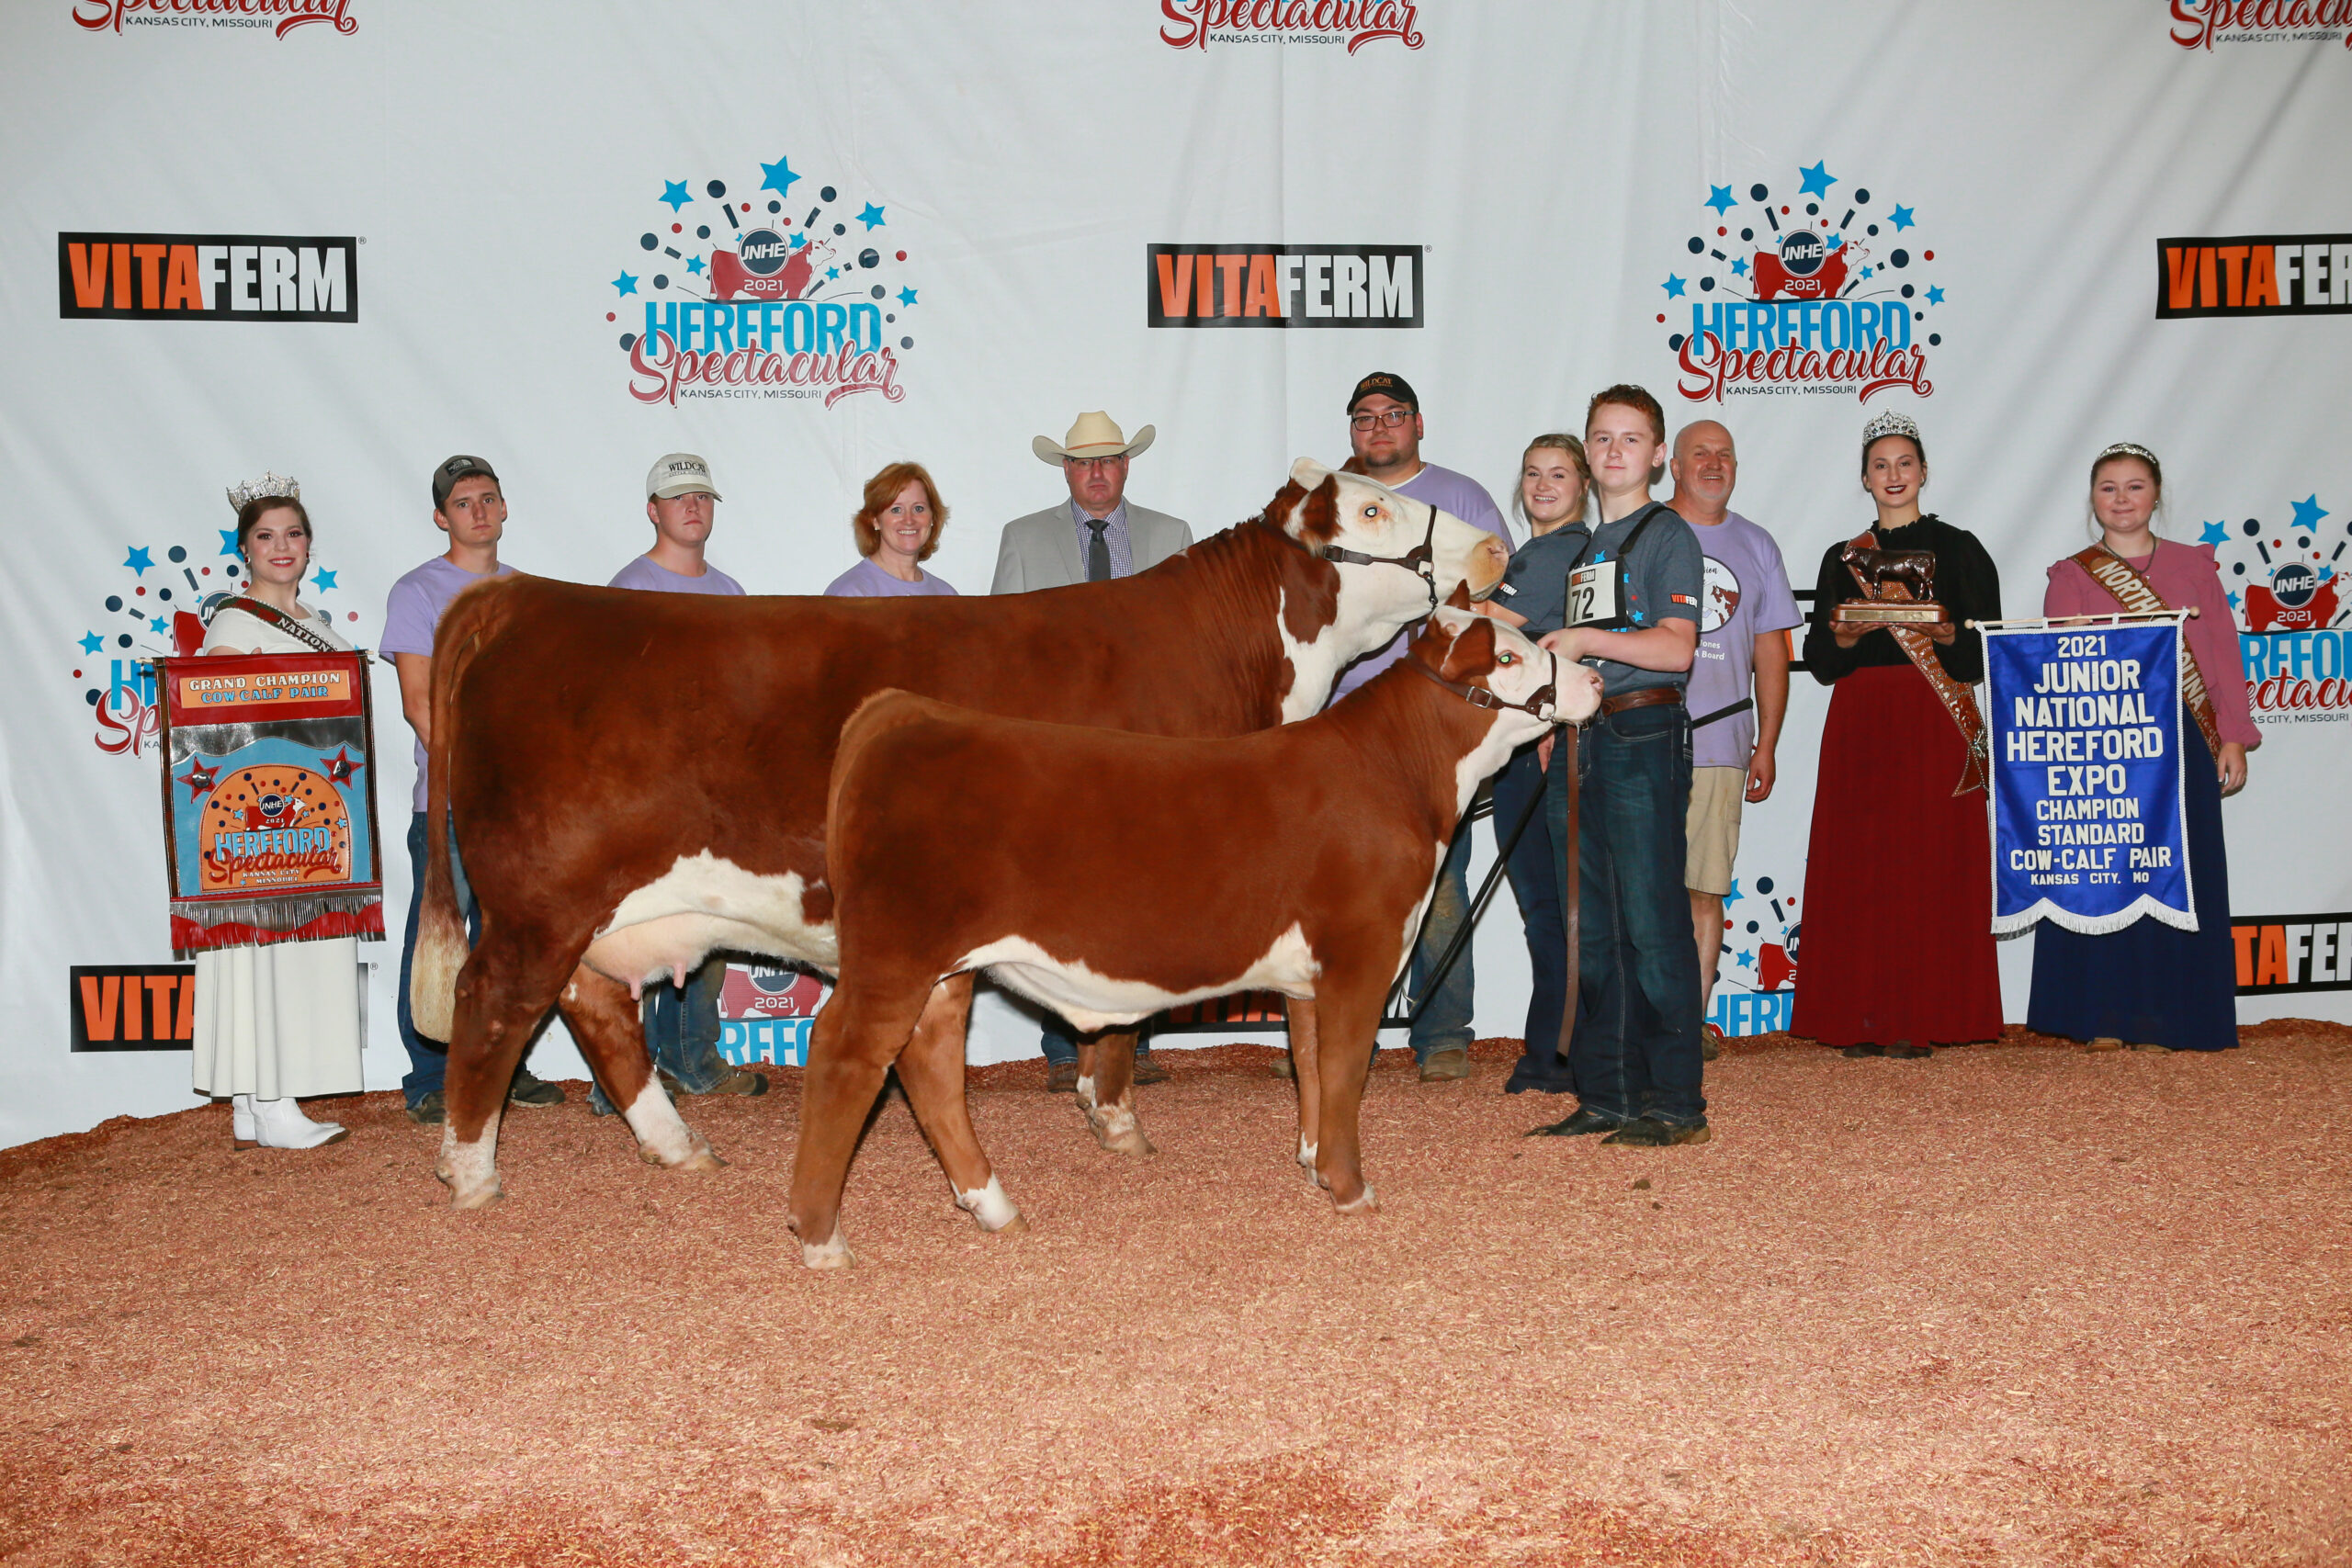 Jones, Miller Achieve Success in the Cow-Calf Show at the 2021 Junior National Hereford Expo